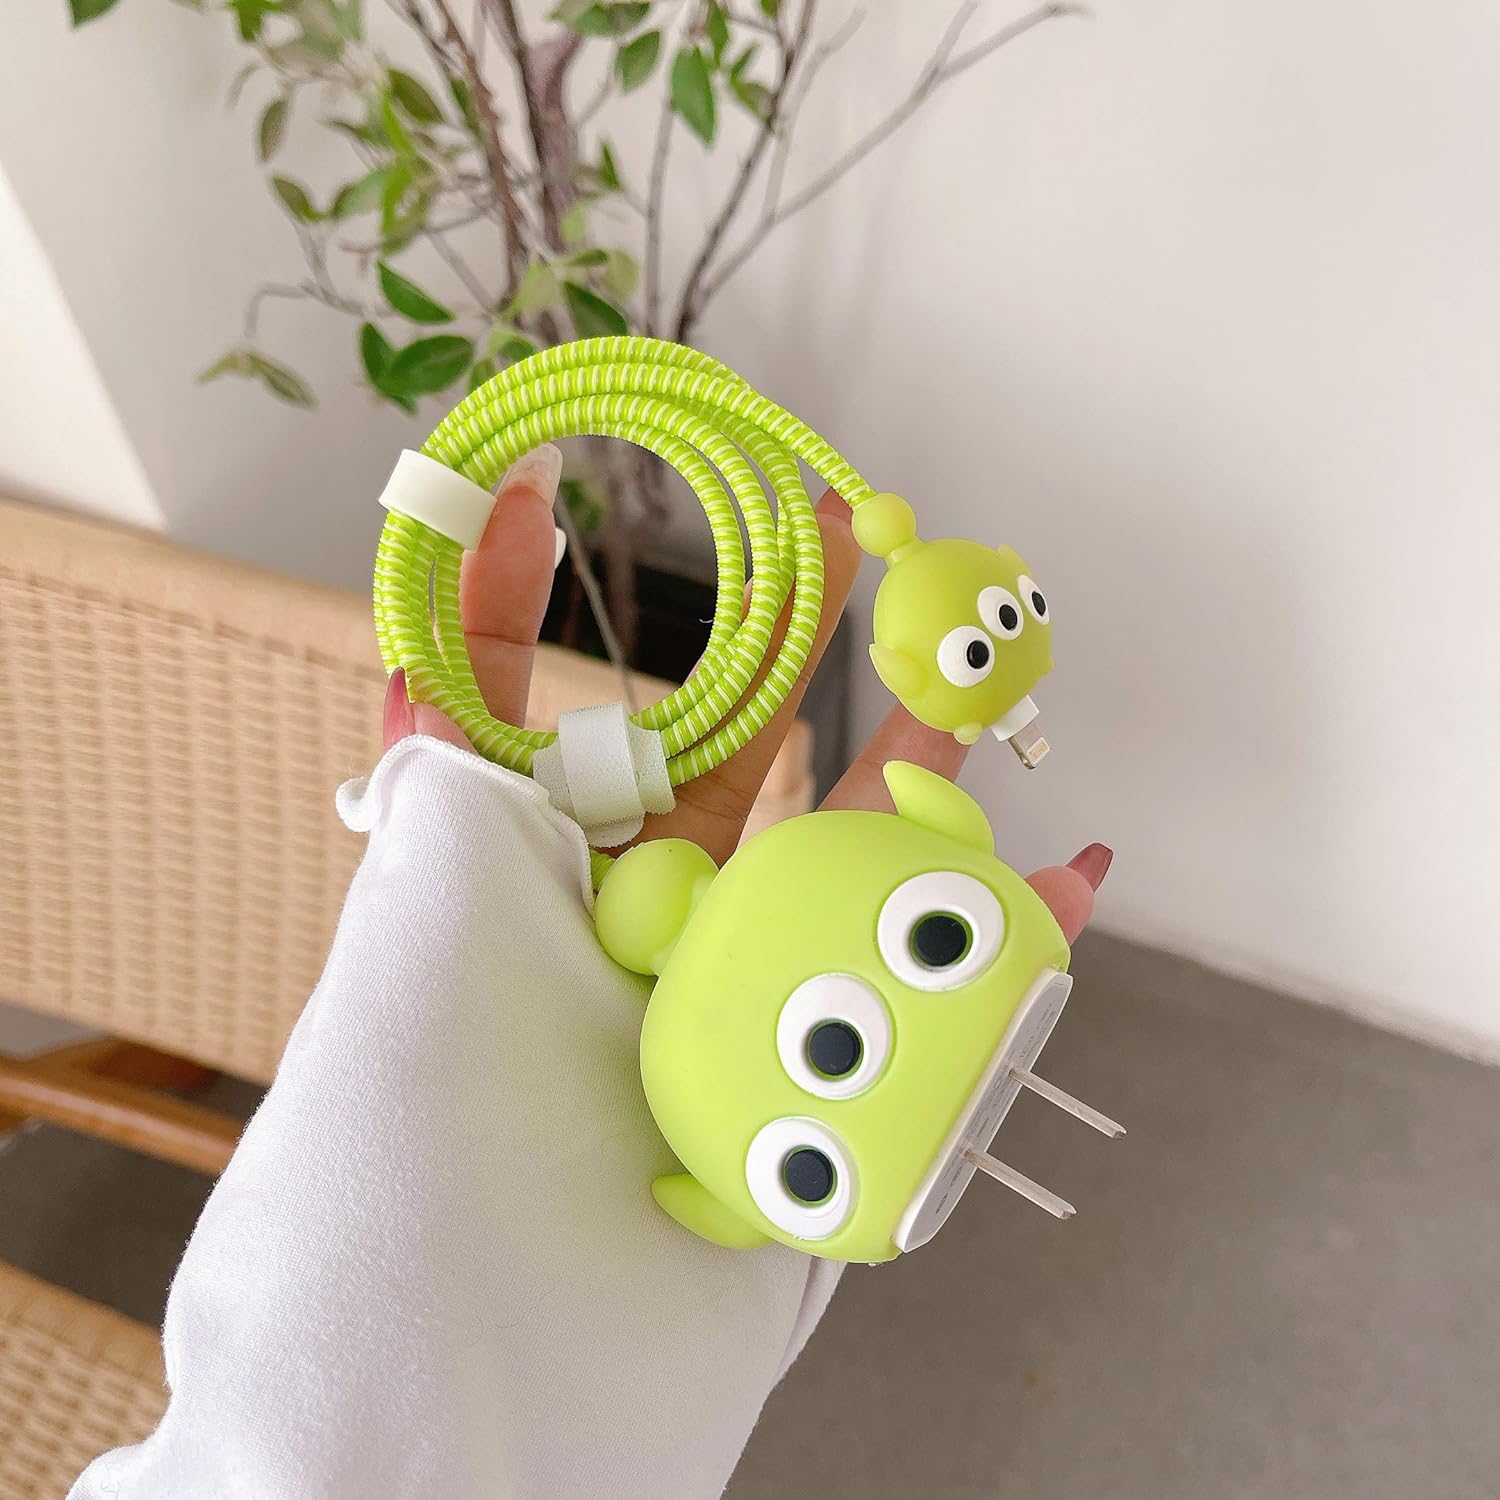 Iphone Charger Case Cover - Cute Aliens